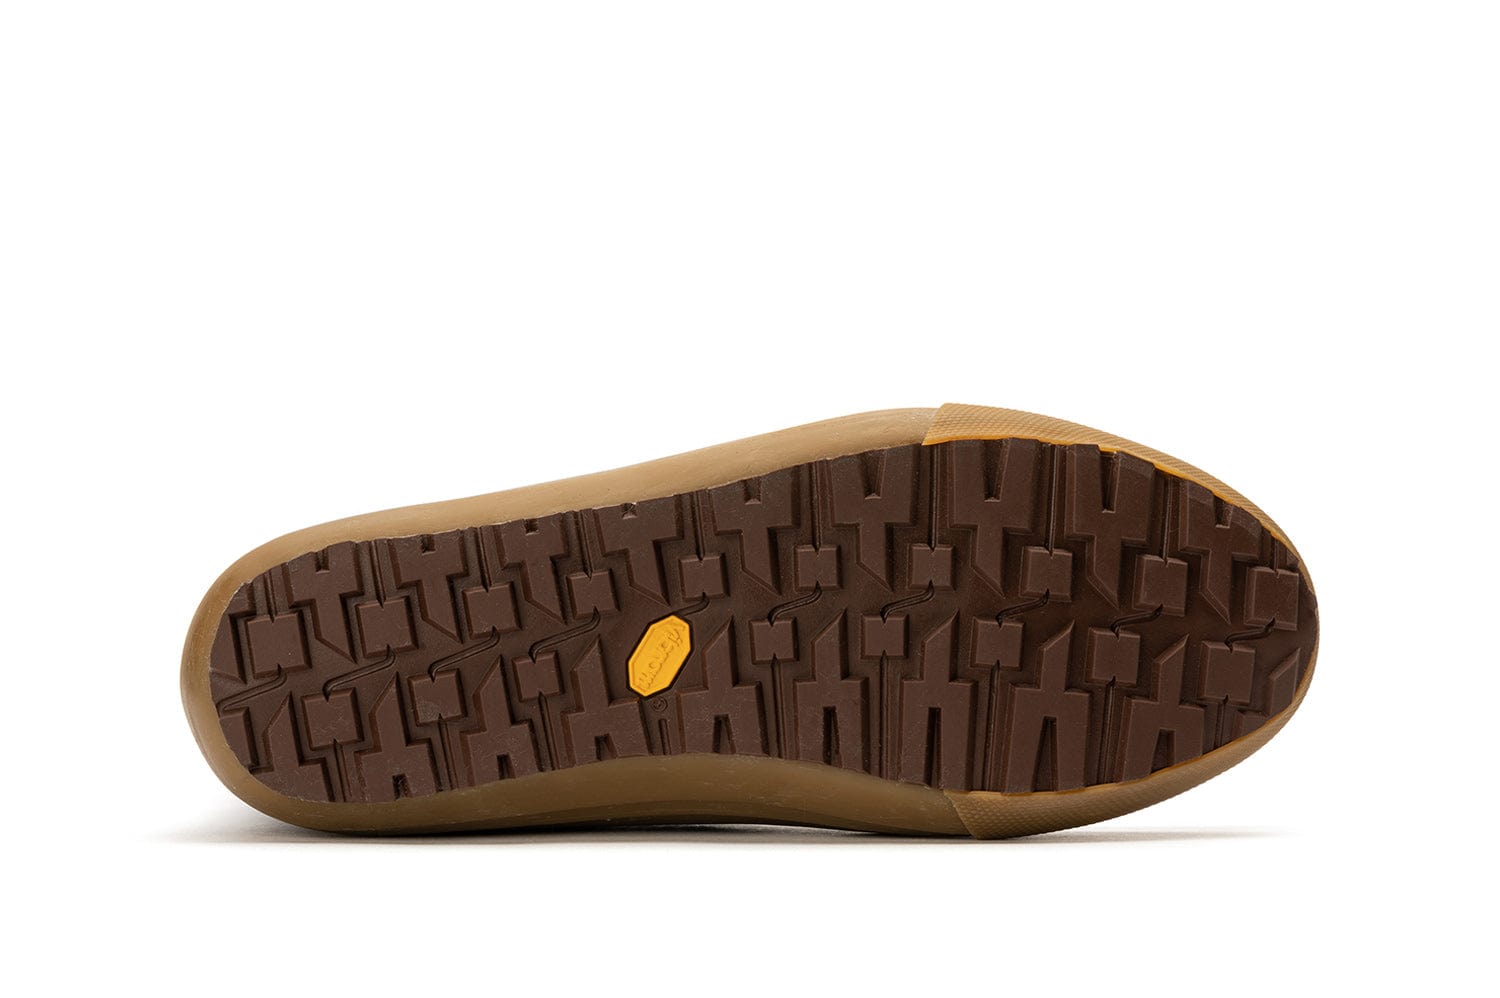 Treaded sole of the Hickory/Charcoal Cascade Range Boot showcasing its deep grooves and vibram logo.